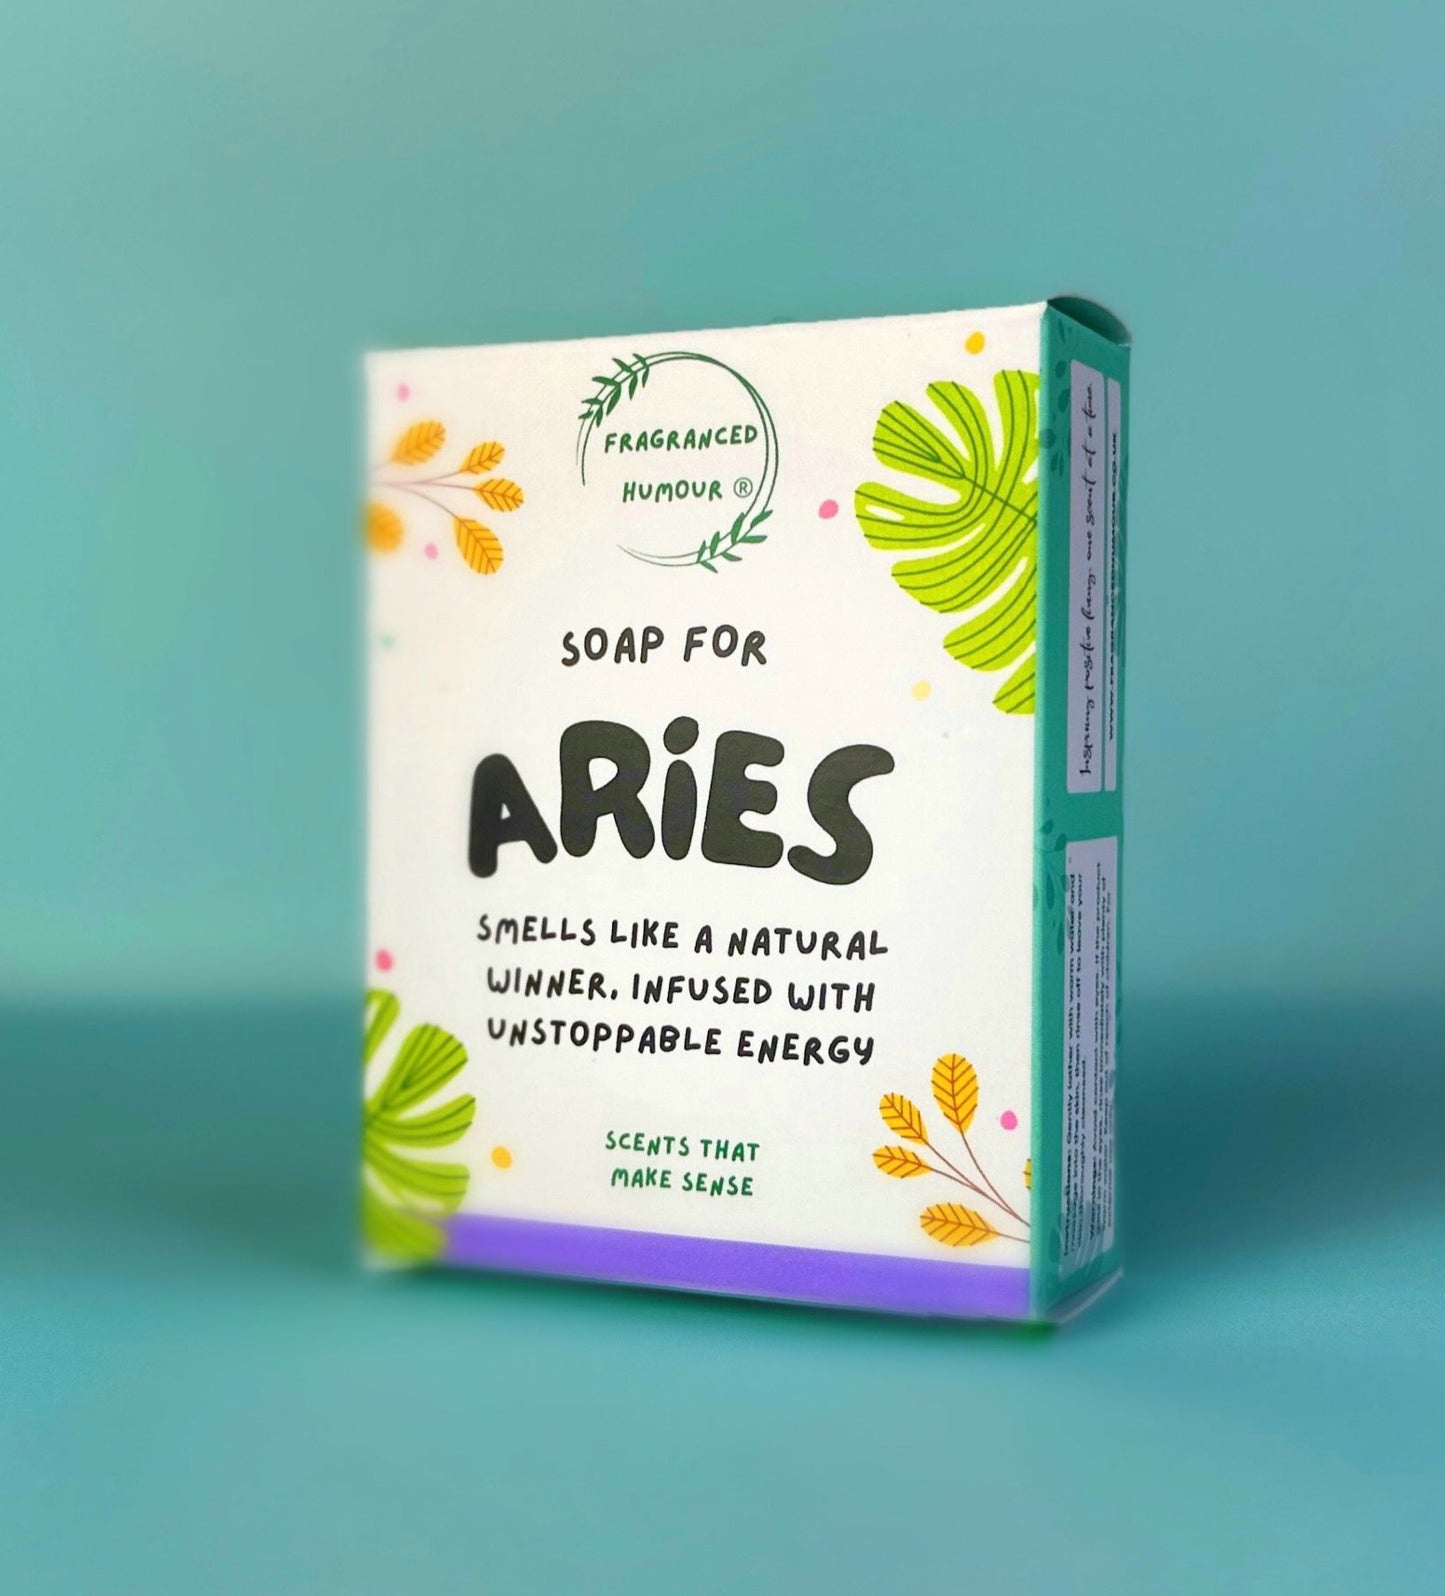 aries birthday gift novelty soap with funny text soap for aries smells like a natural winner infused with unstoppable energy